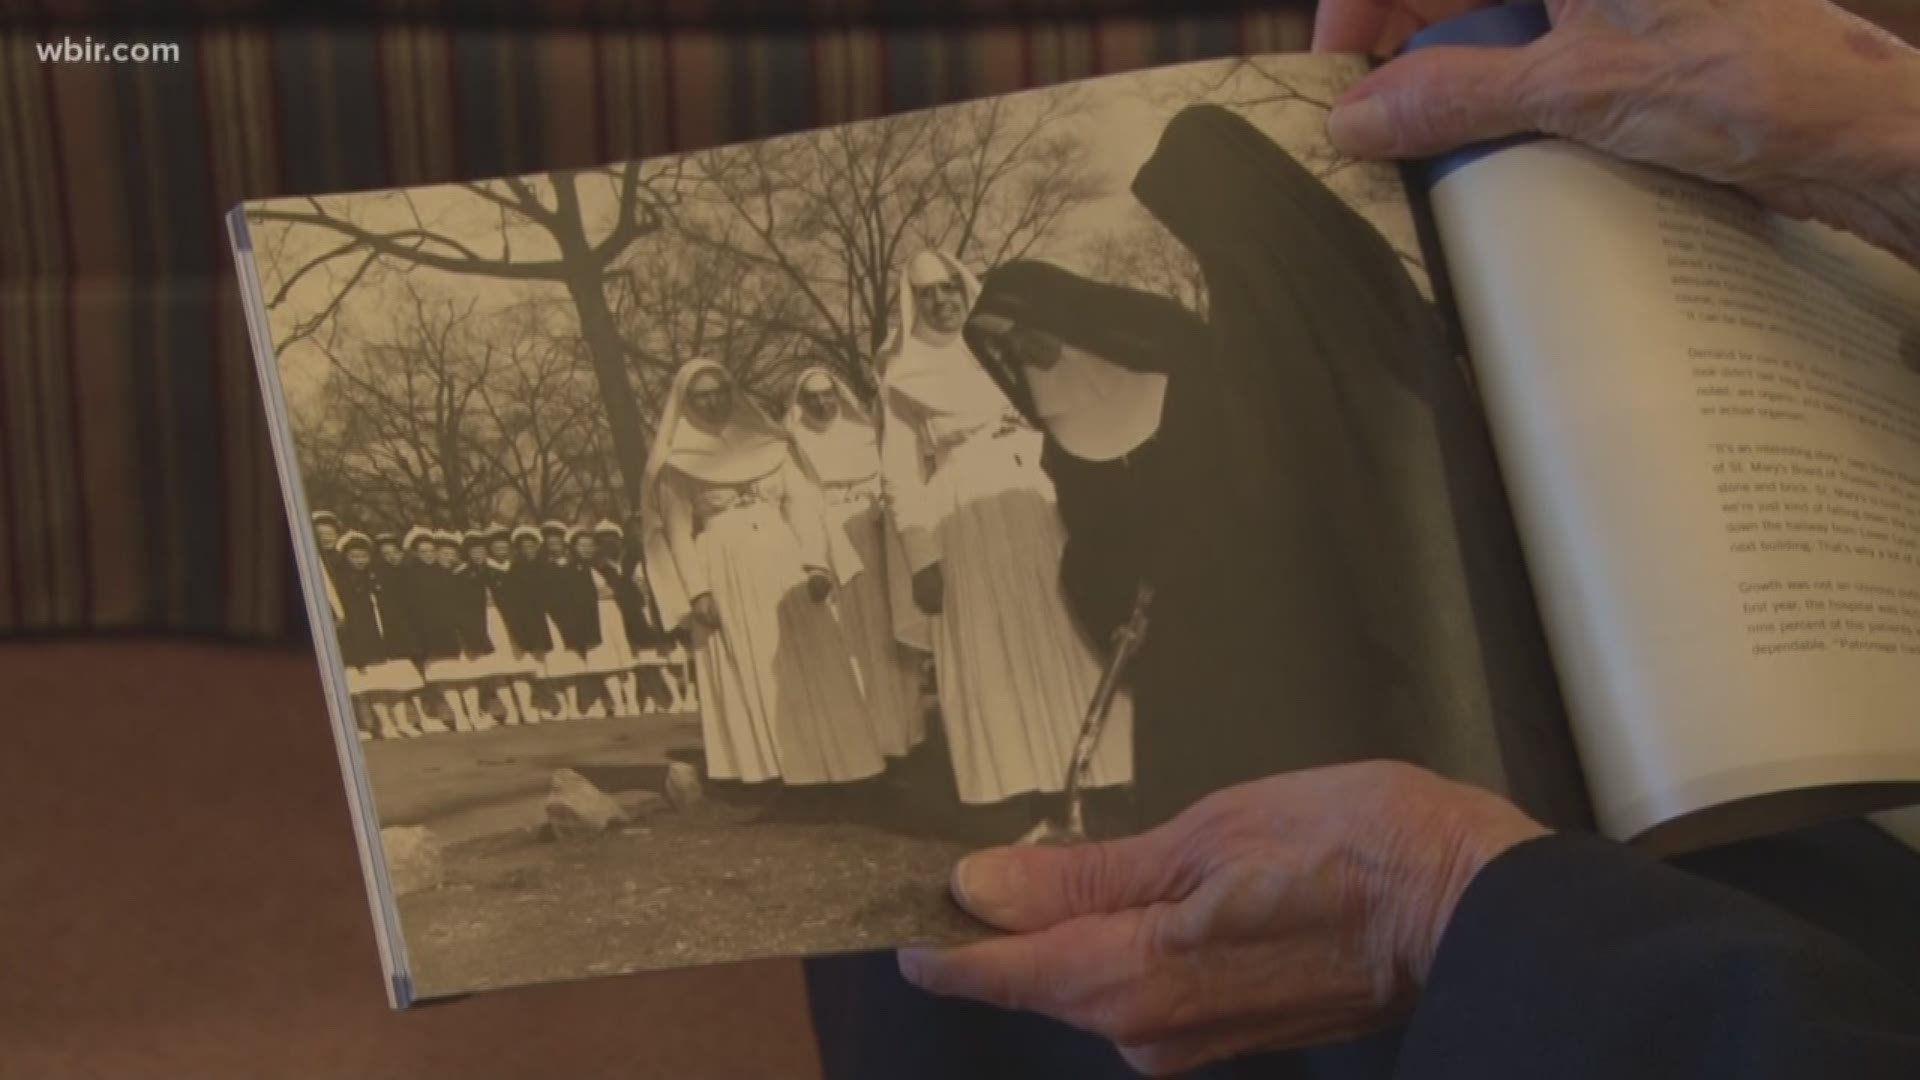 The Sisters of Mercy have been at the Old Saint Mary's Hospital from the very beginning.